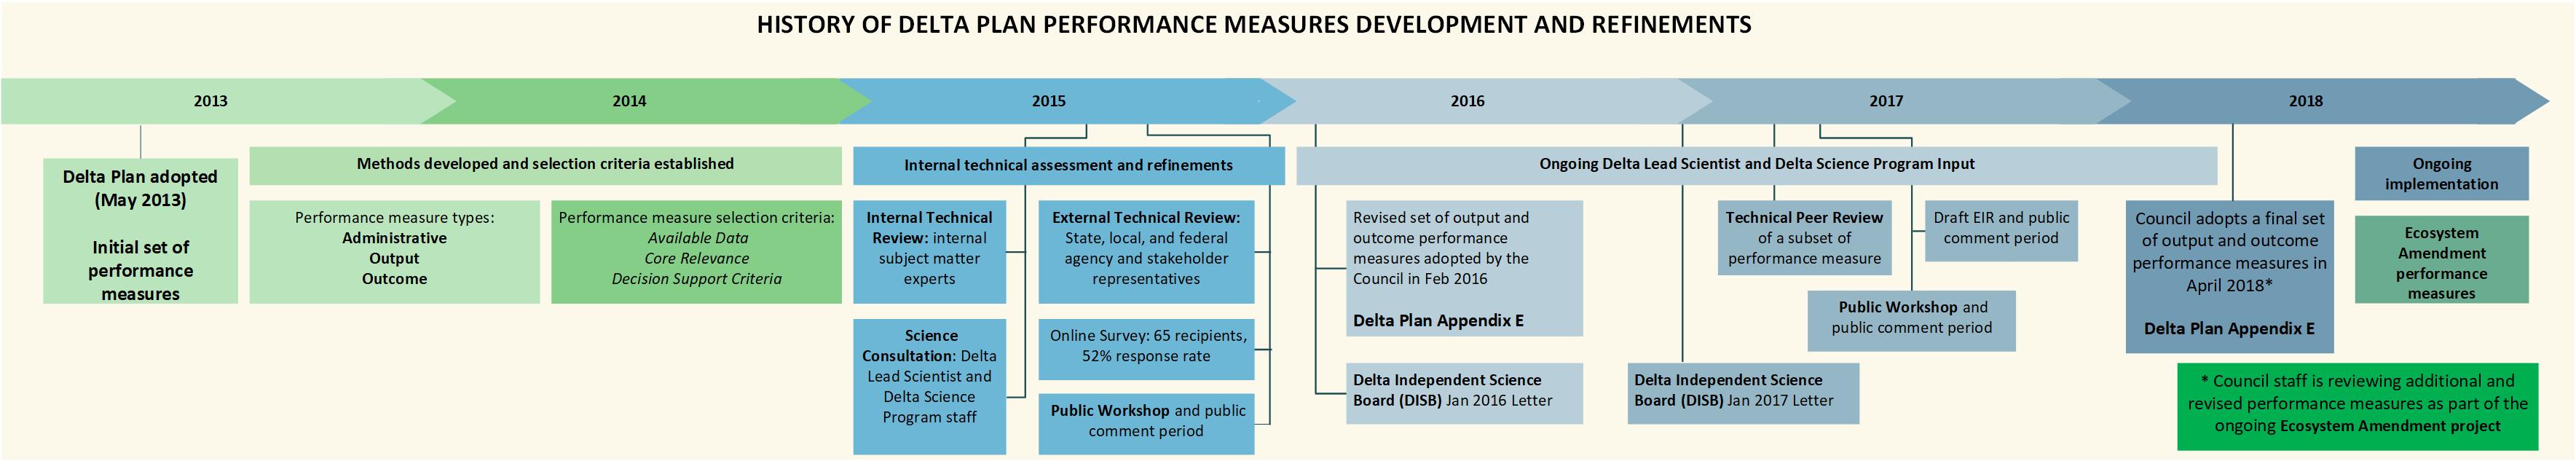 Timeline of the performance measures development and refinement process 2013-2018. 